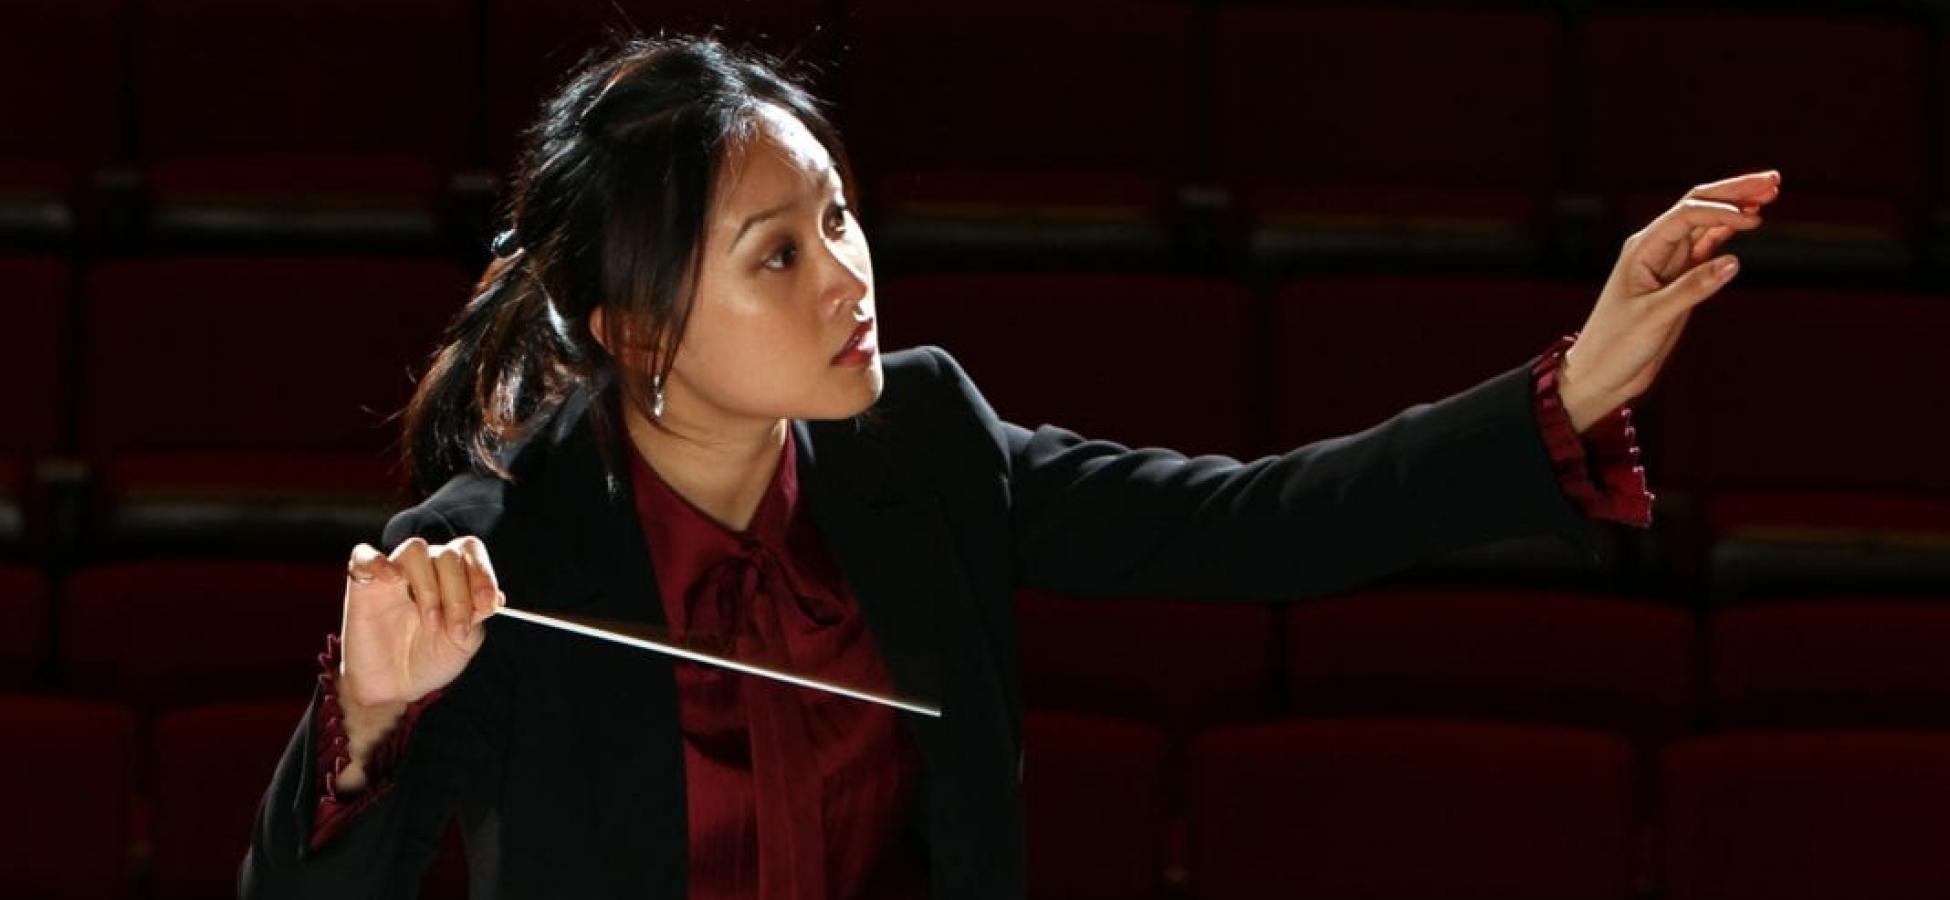 A person in formal attire focuses holds one hand out with a focused gaze in that direction, and the other hand holds a conductor's wand